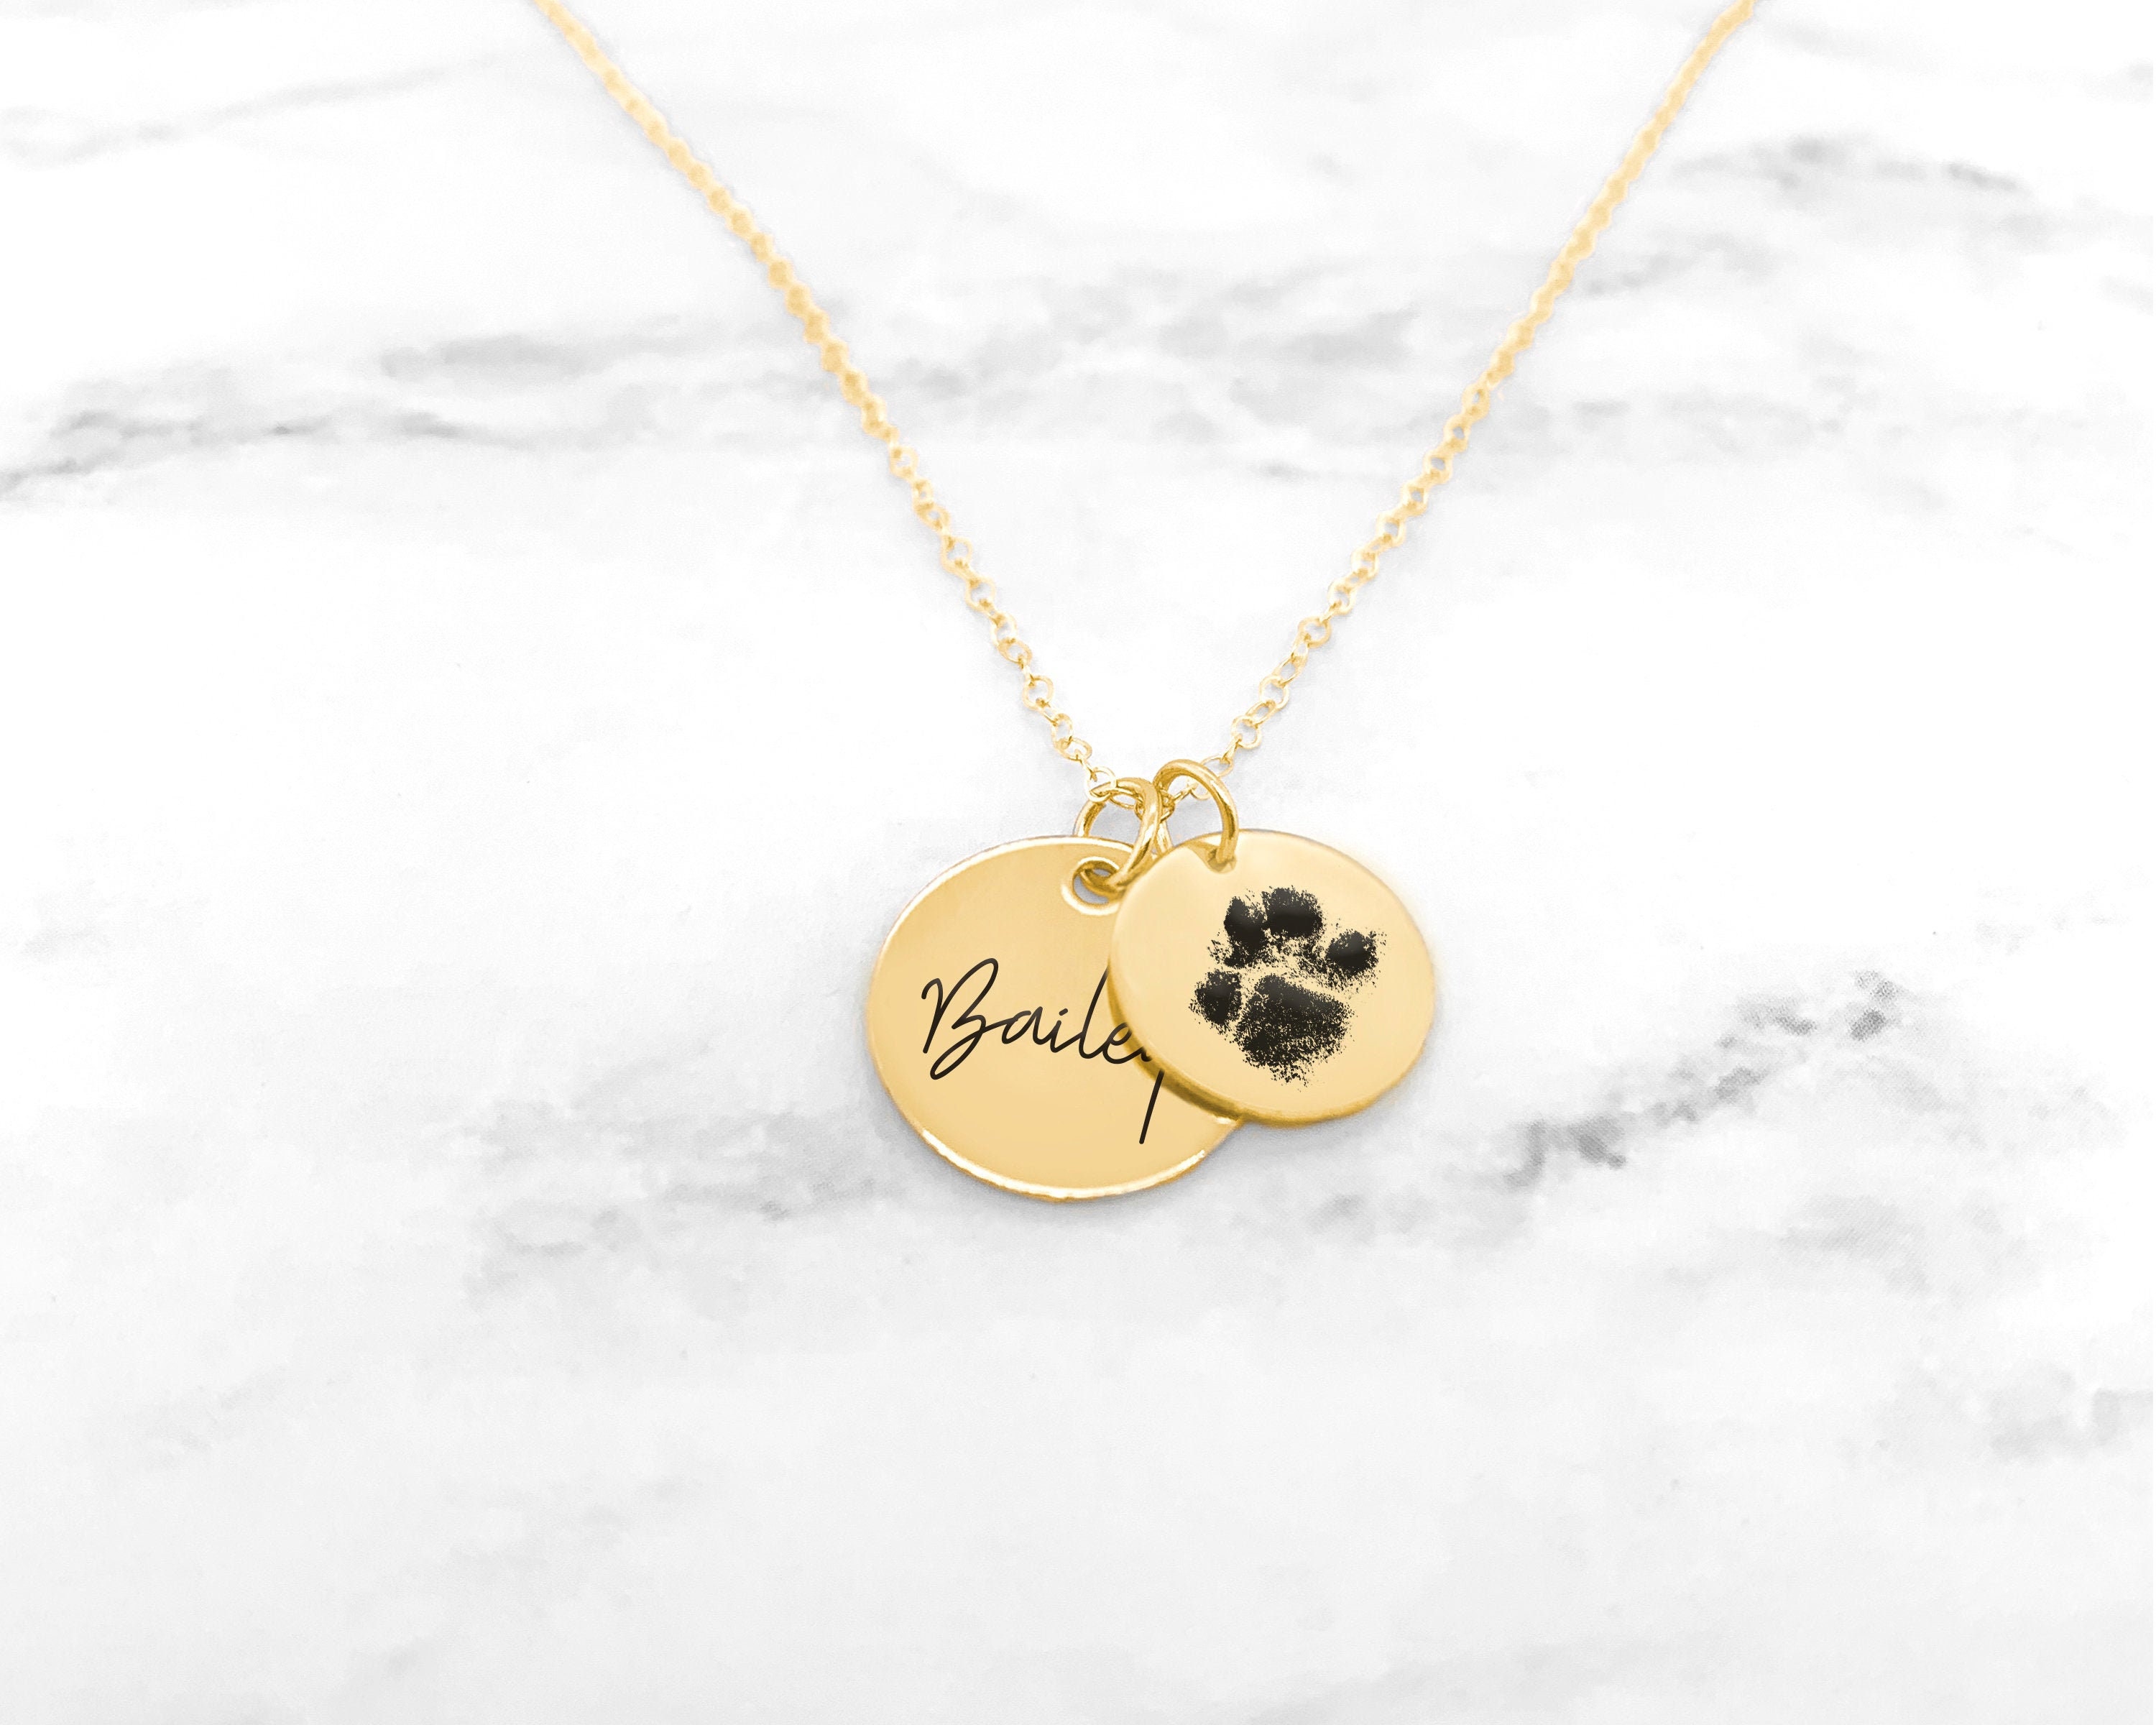 Buy Custom Paw Necklace With Name, Dog Paw Necklace, Personalized Name  Necklace, Dog Mom Necklace, Dog Name Jewelry, Christmas Gift Online in  India - Etsy